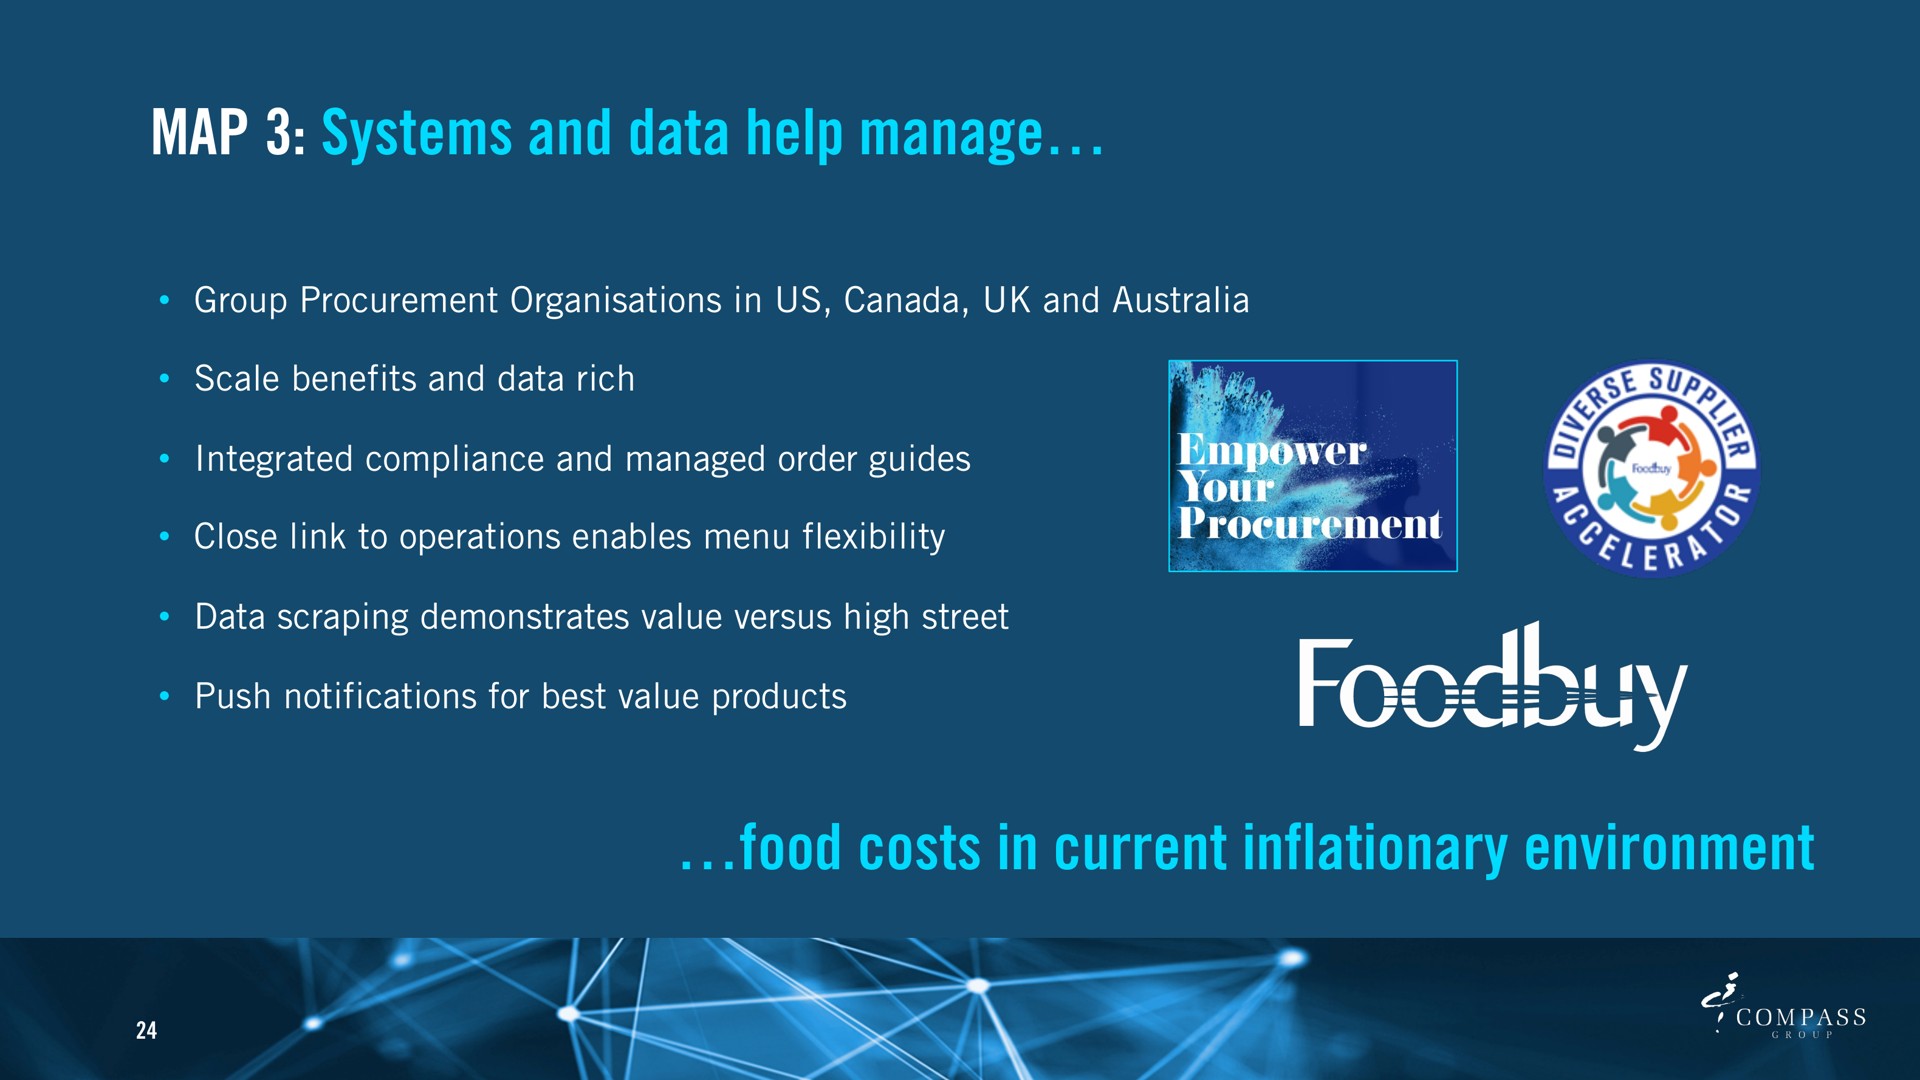 map systems and data help manage food costs in current inflationary environment | Compass Group